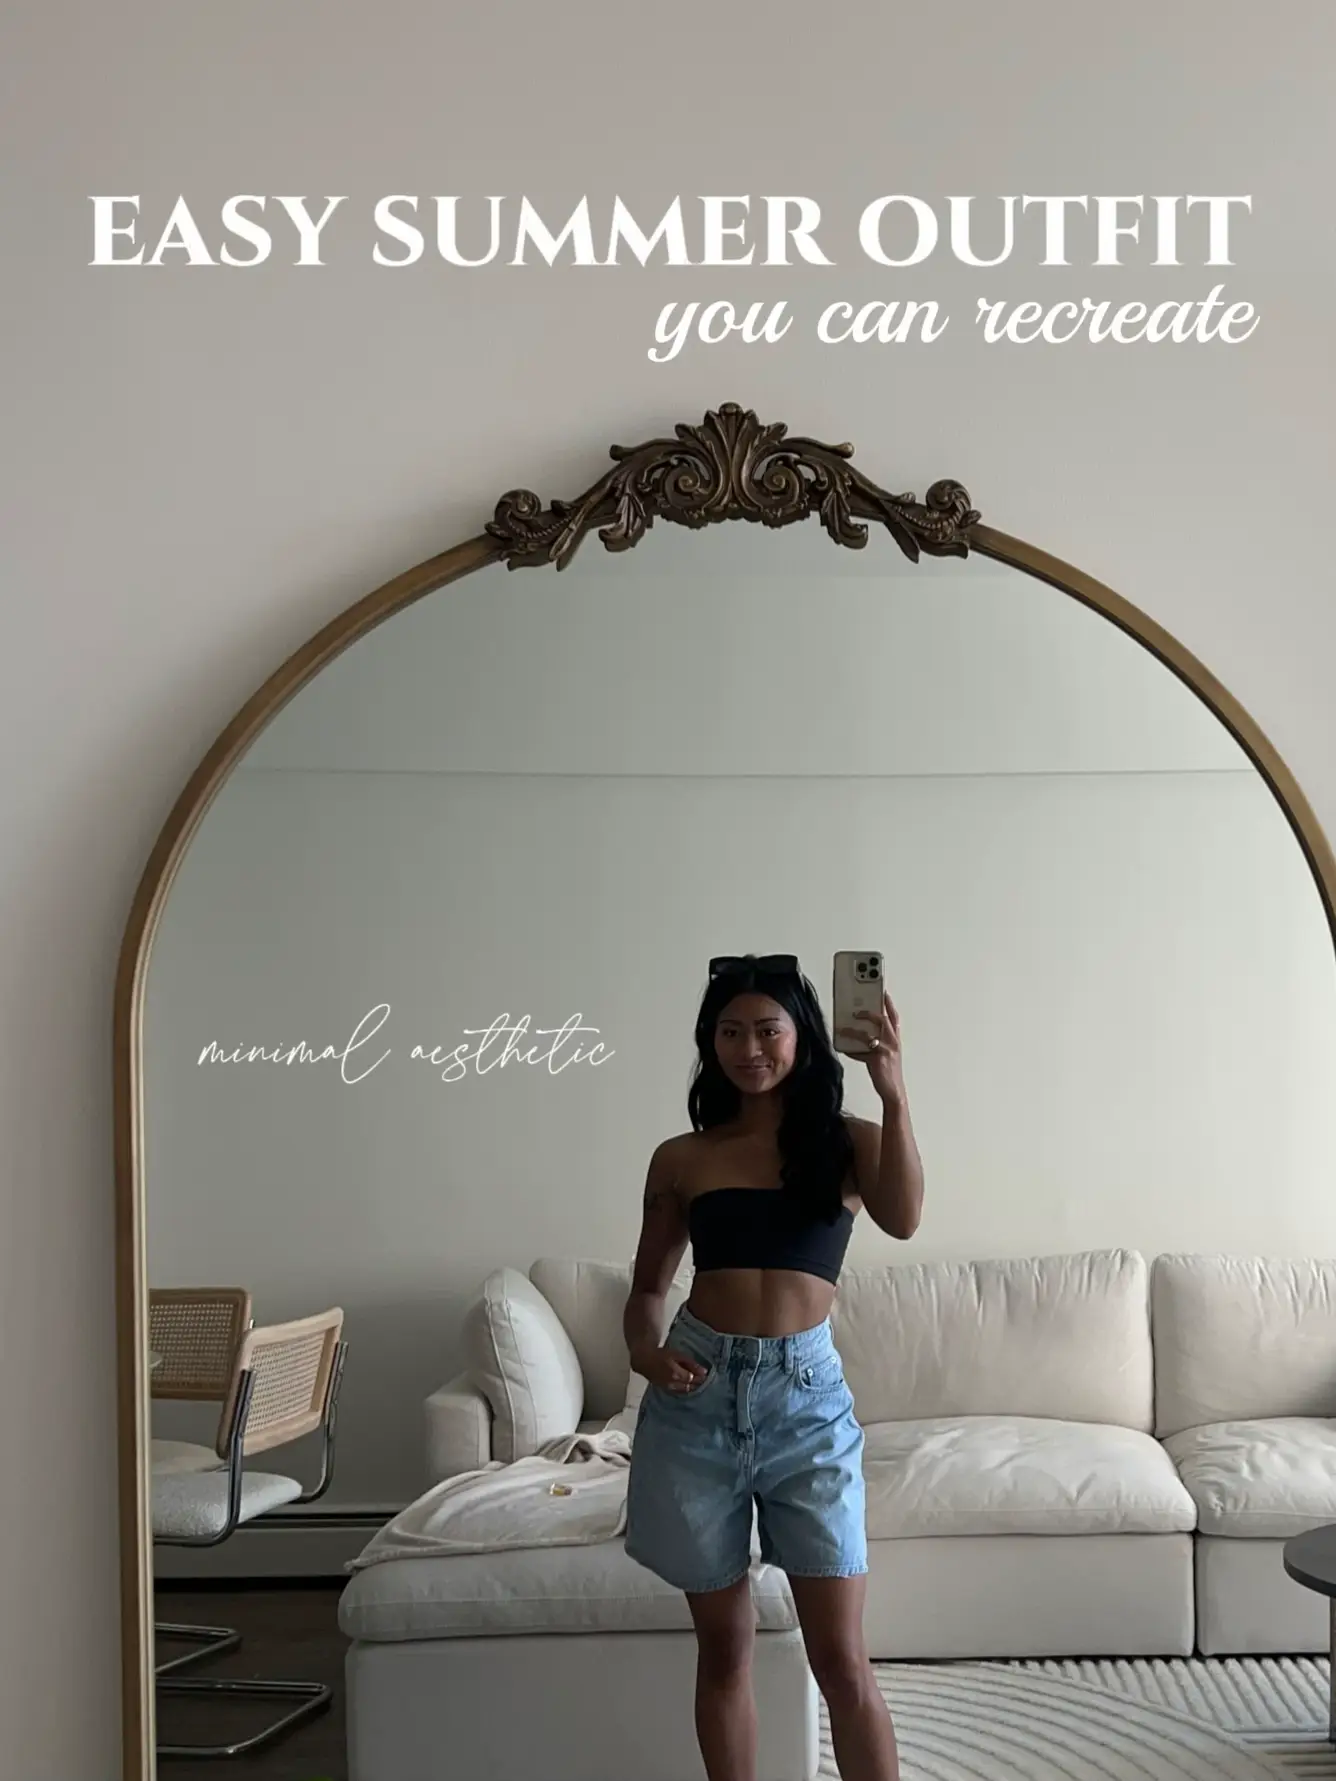 everyday casual looks: bralette edition 🤍, Gallery posted by AJ